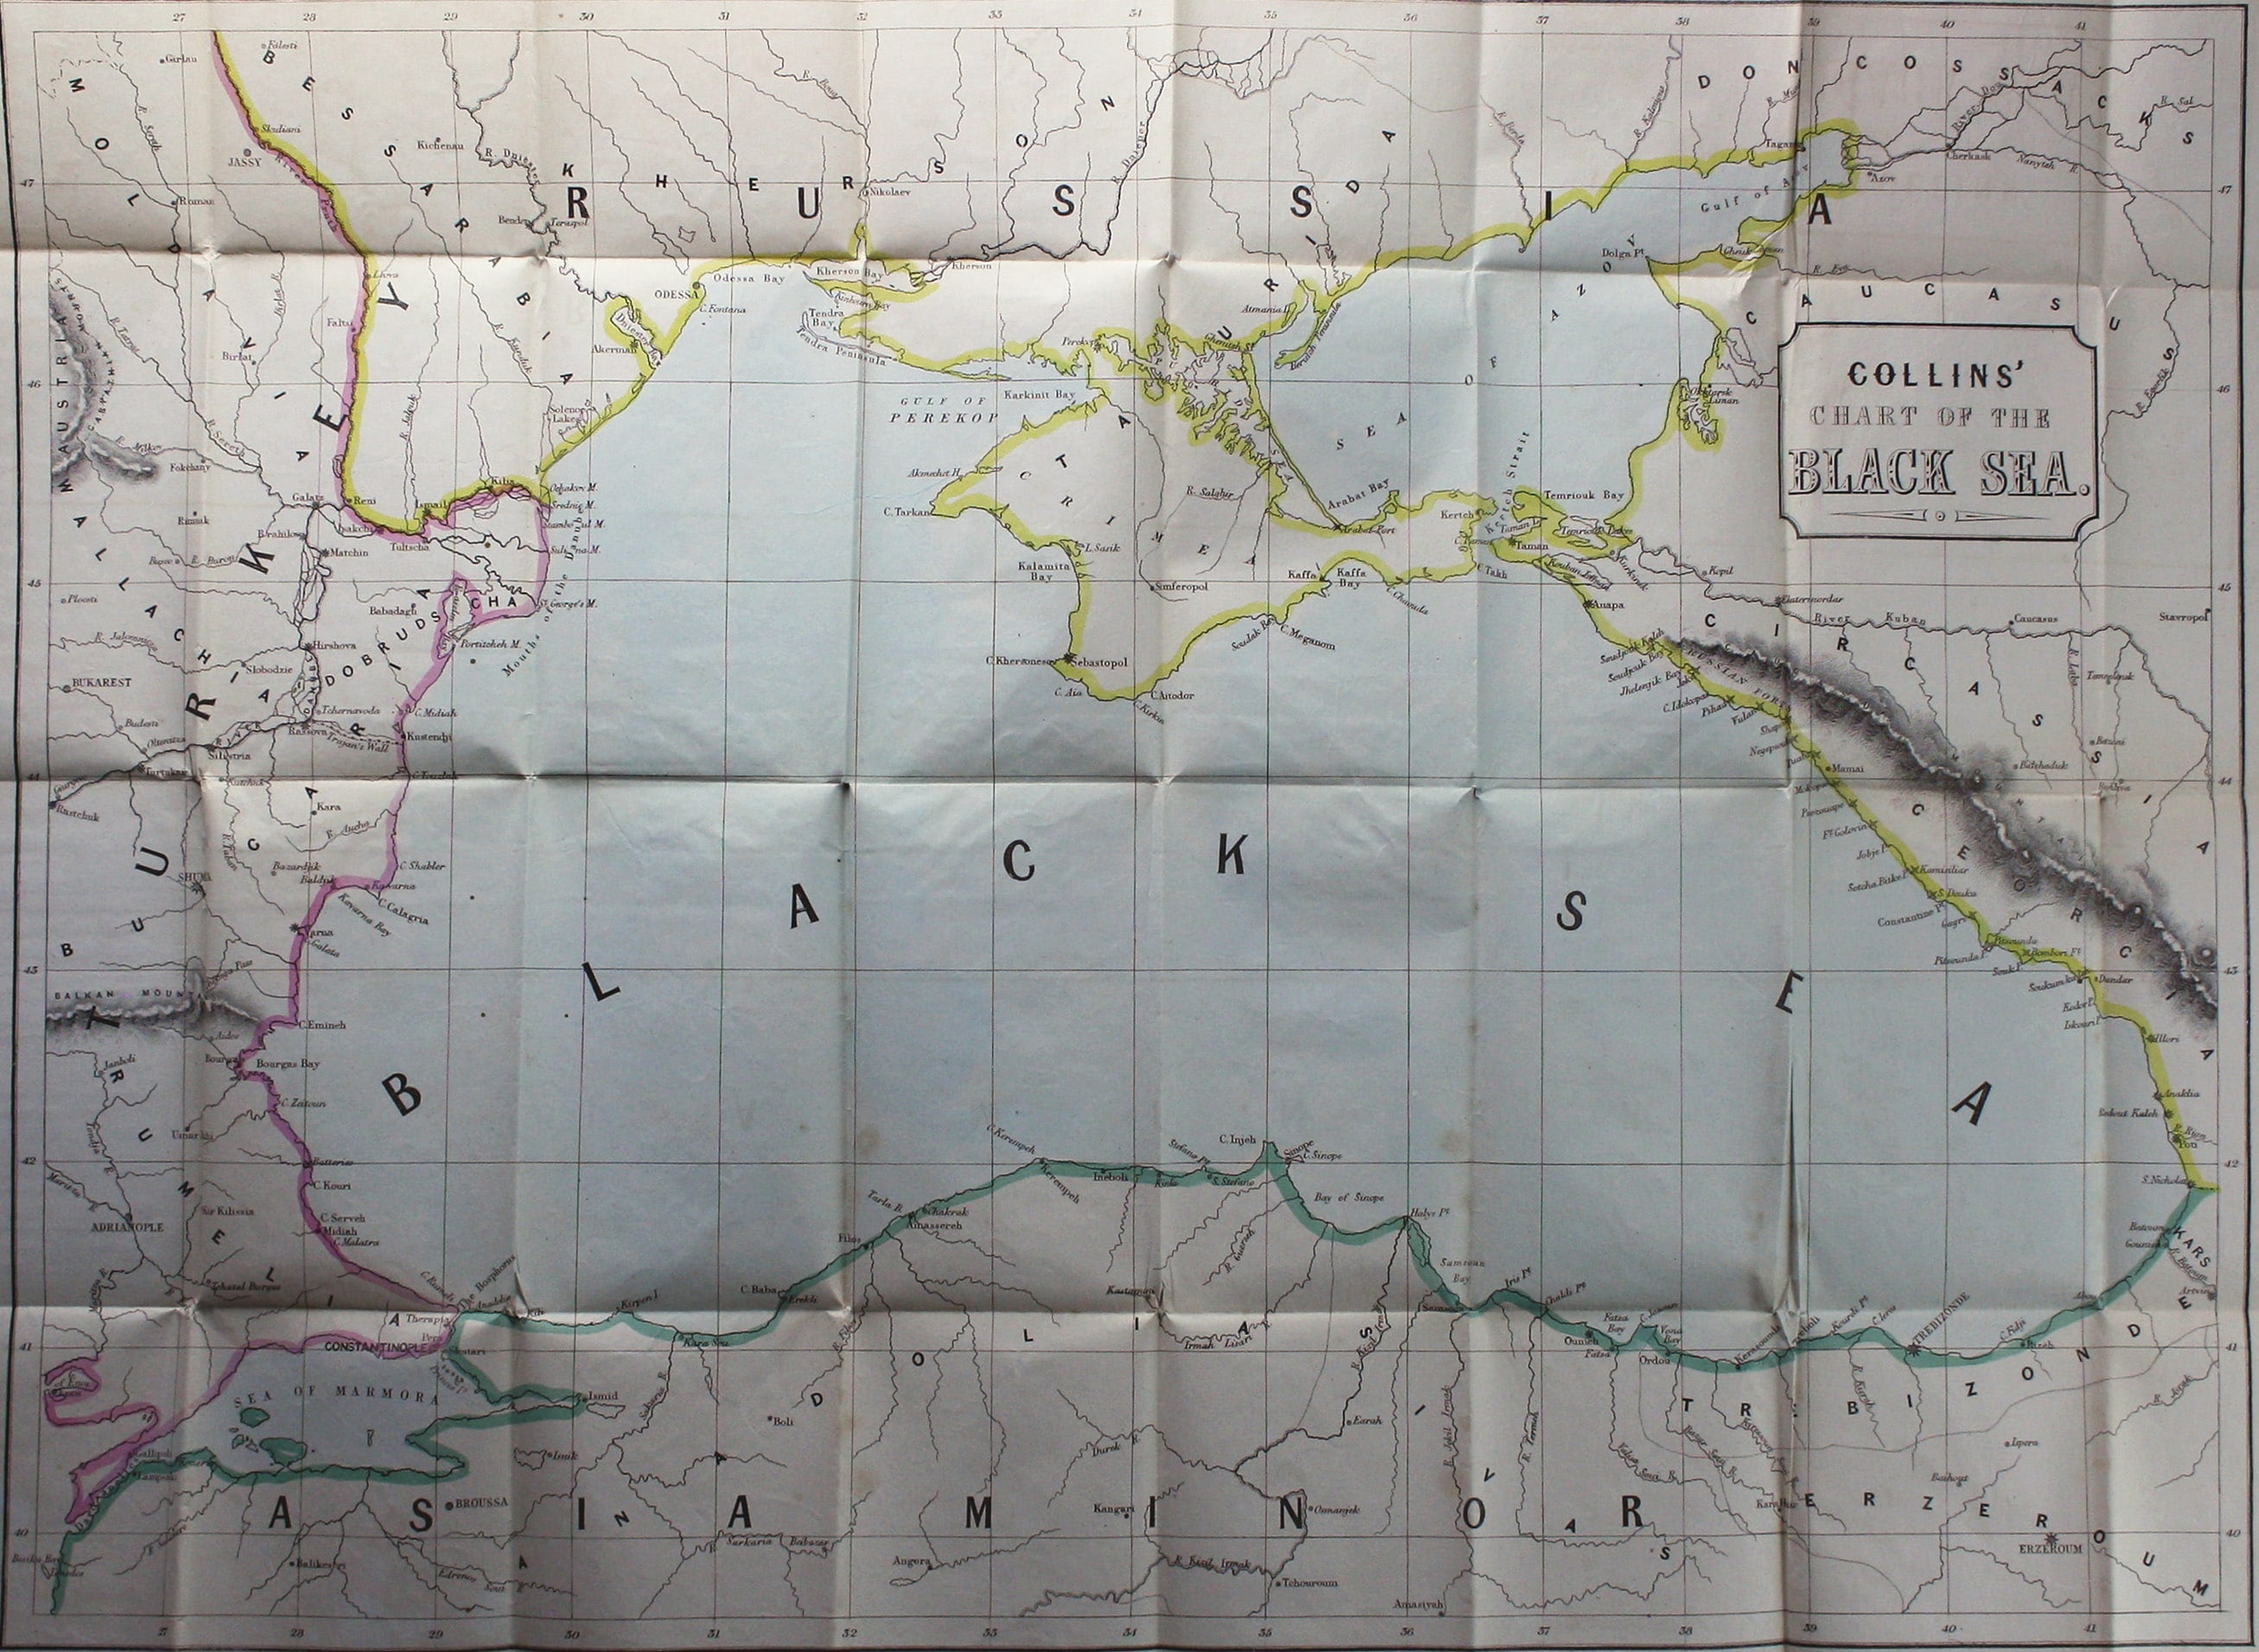 Collins’ Chart of the Black Sea